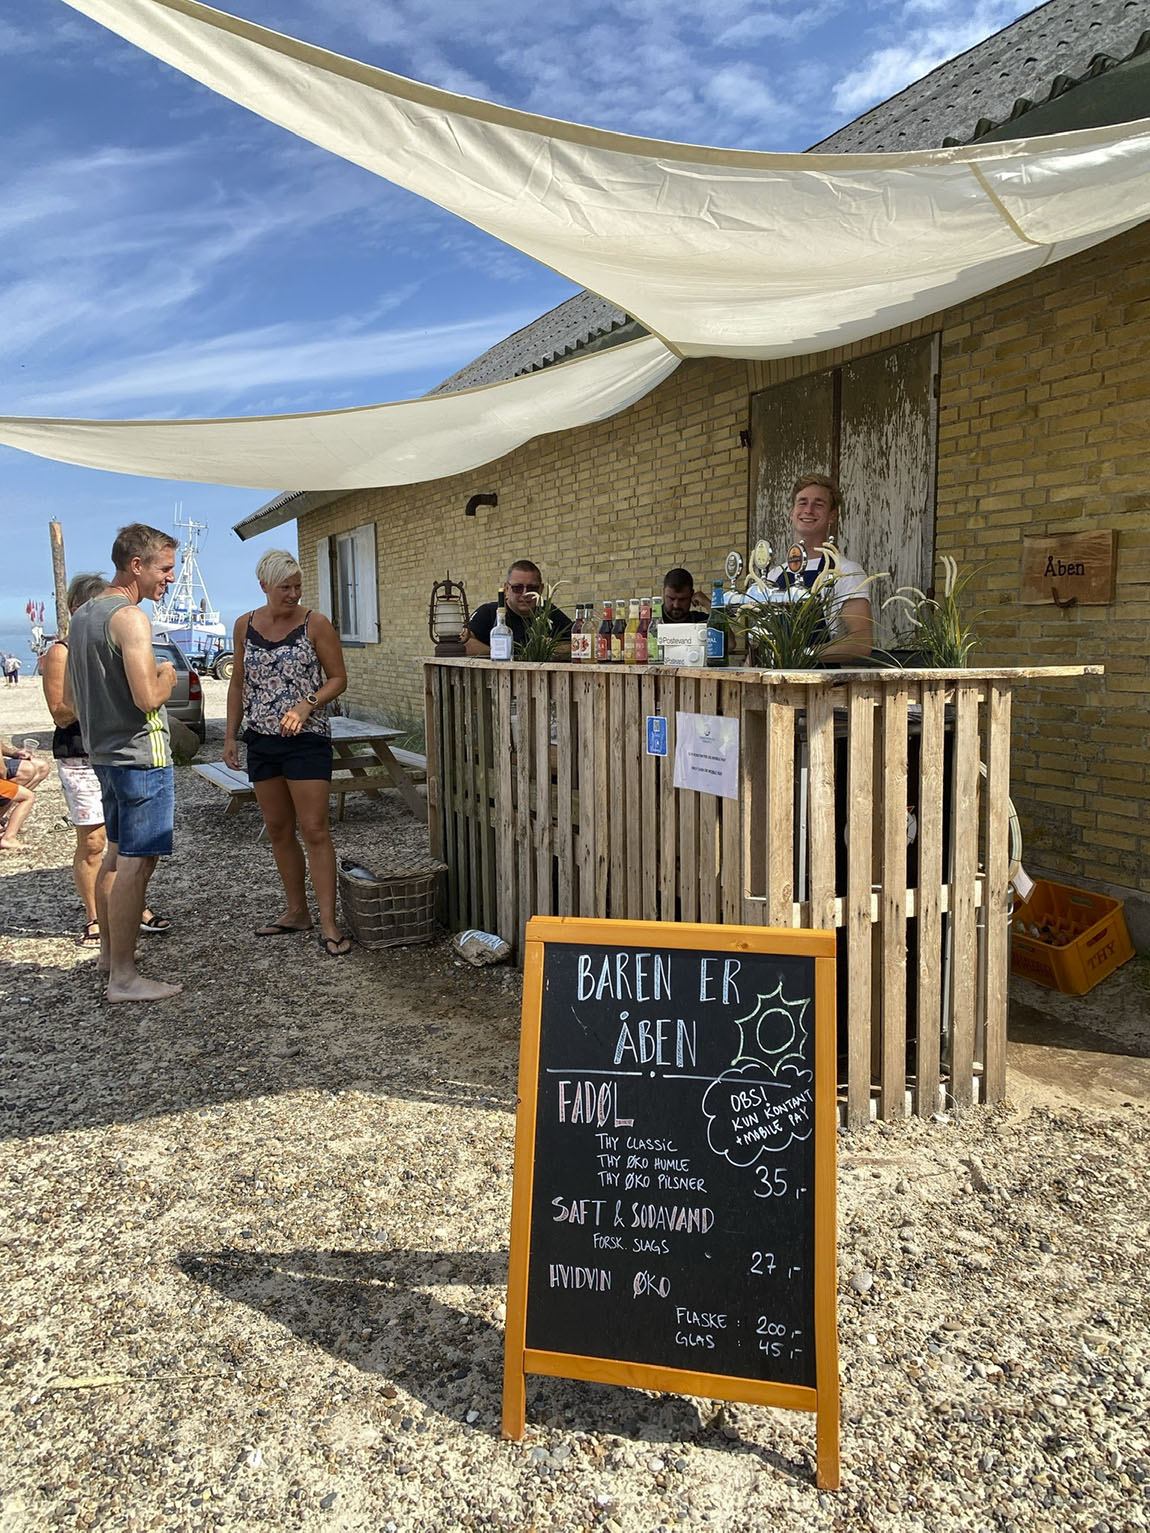 Thorupstrand Fiskehus: Barefoot in the surf with fish ’n’ chips and live music